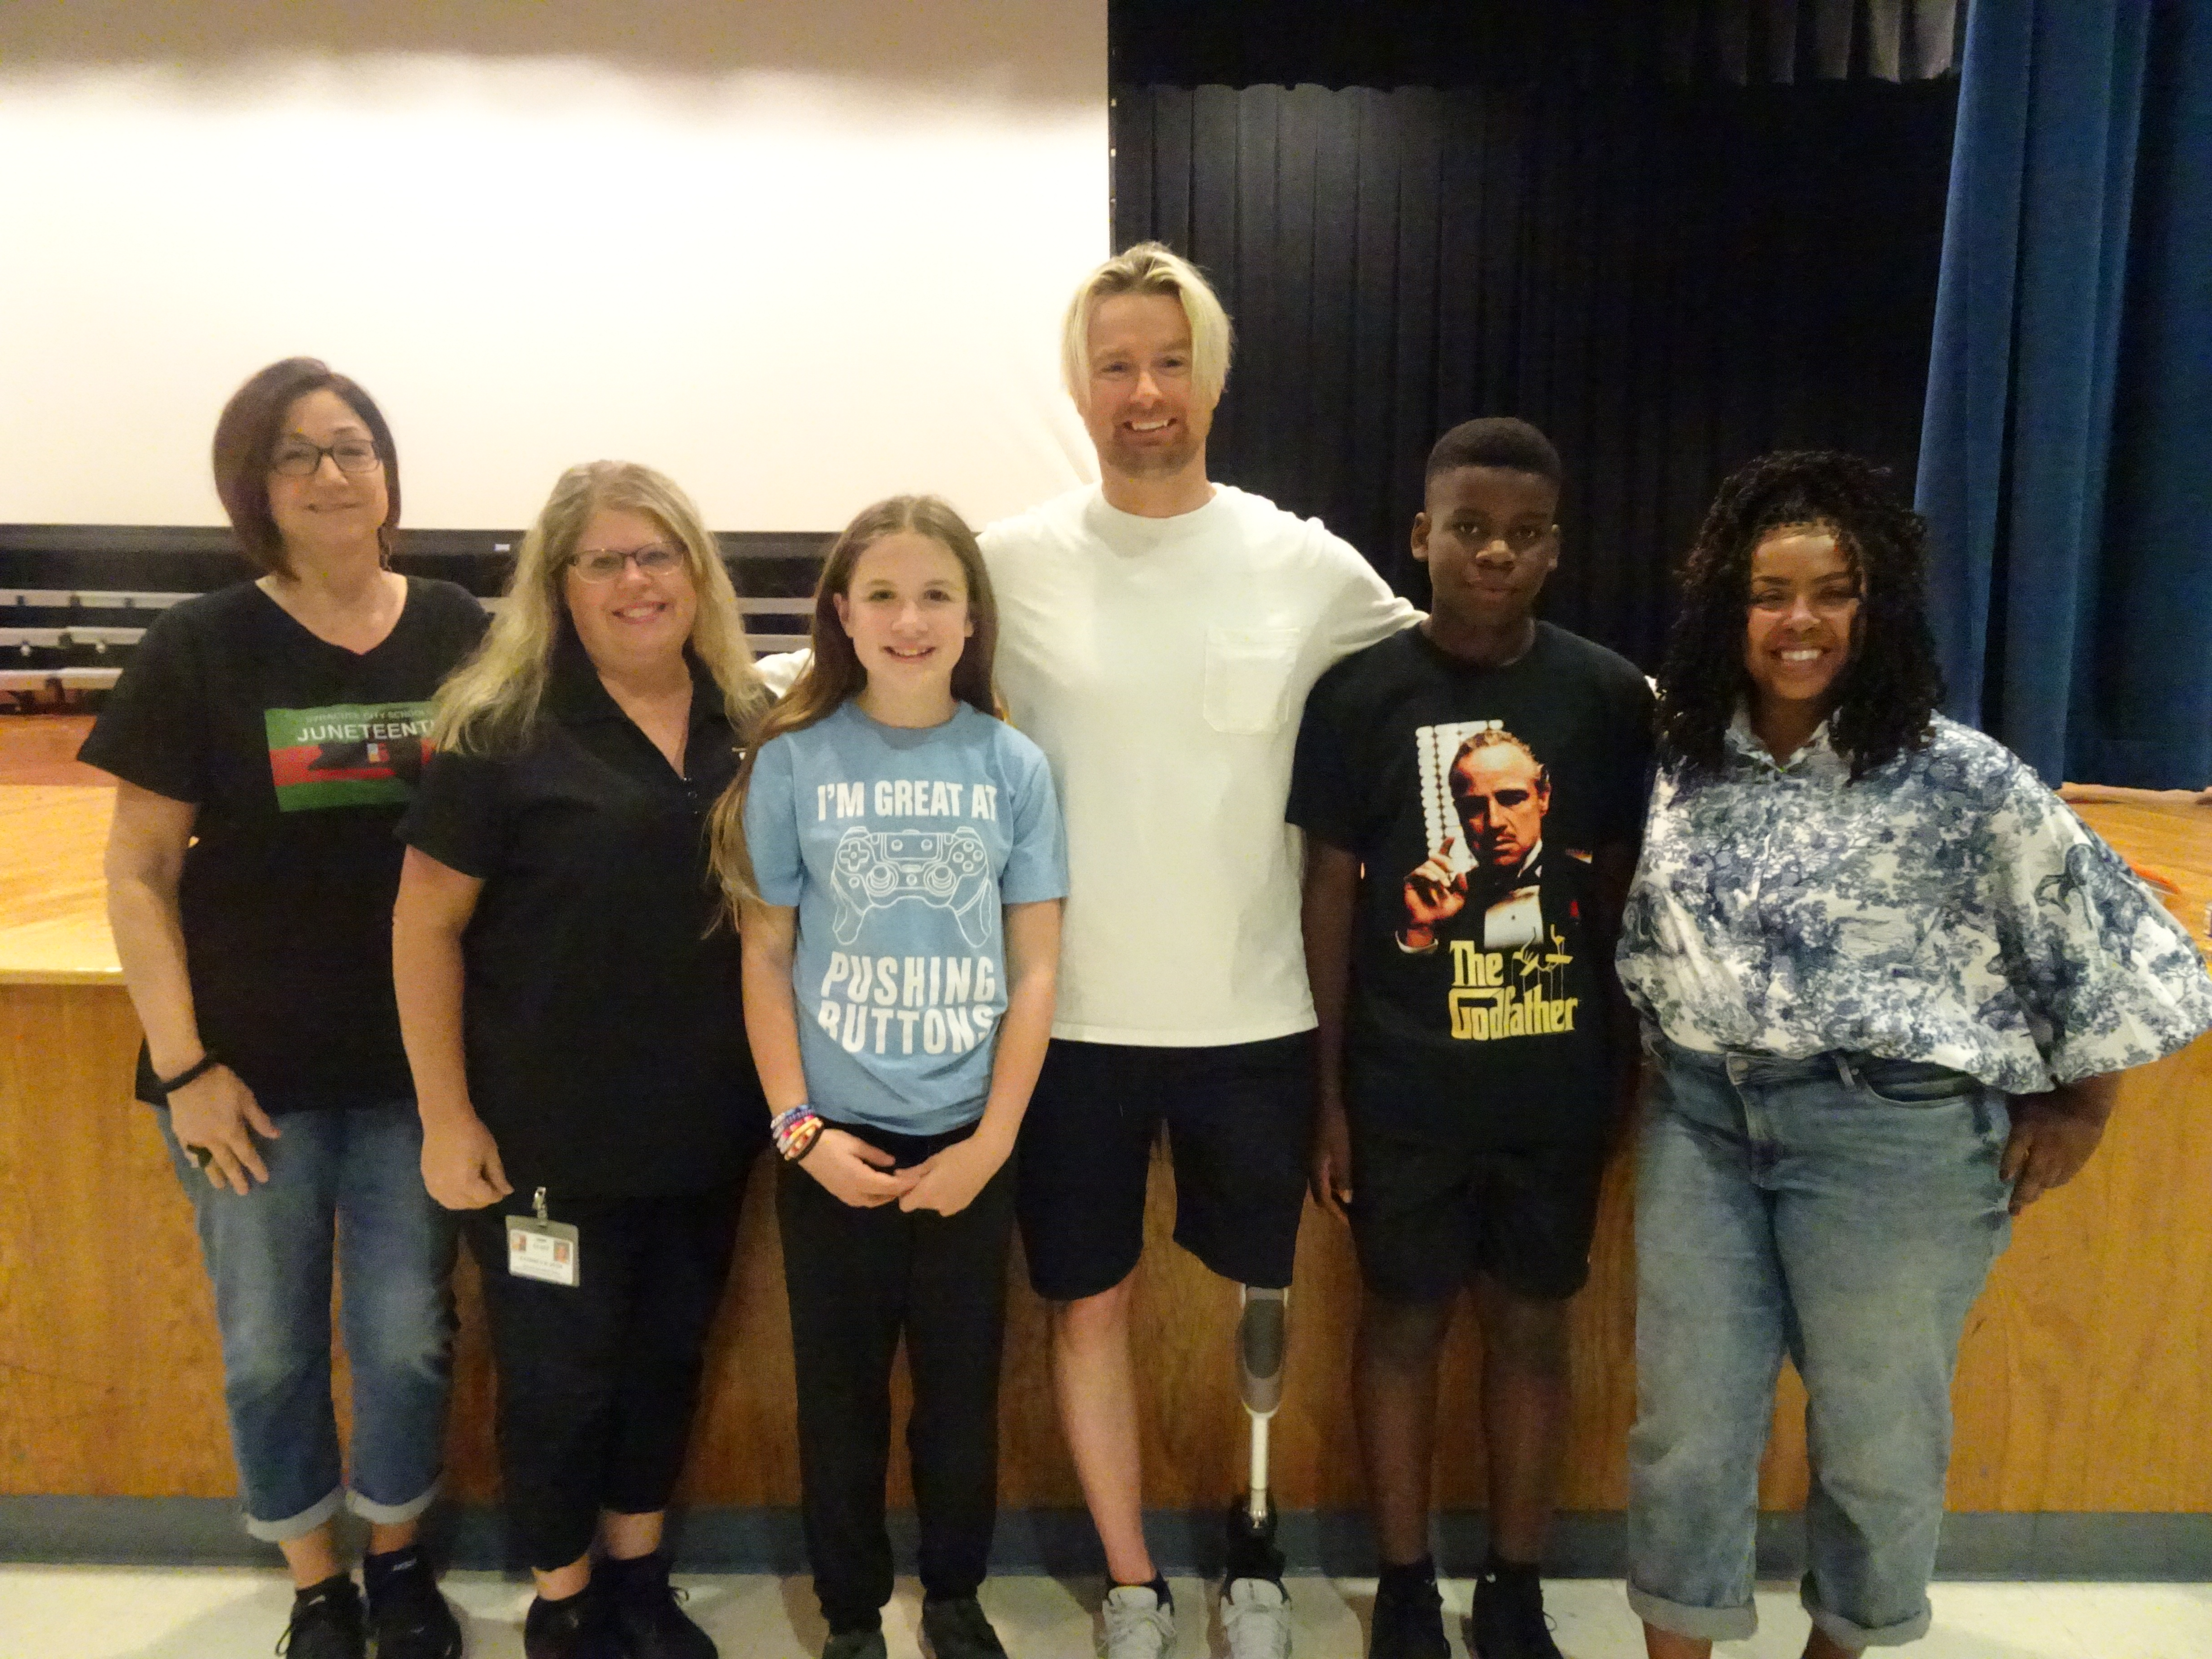 This is a photo of two HW Smith students, standing alongside a motivational speaker and three GEAR UP staff members in their school auditorium.